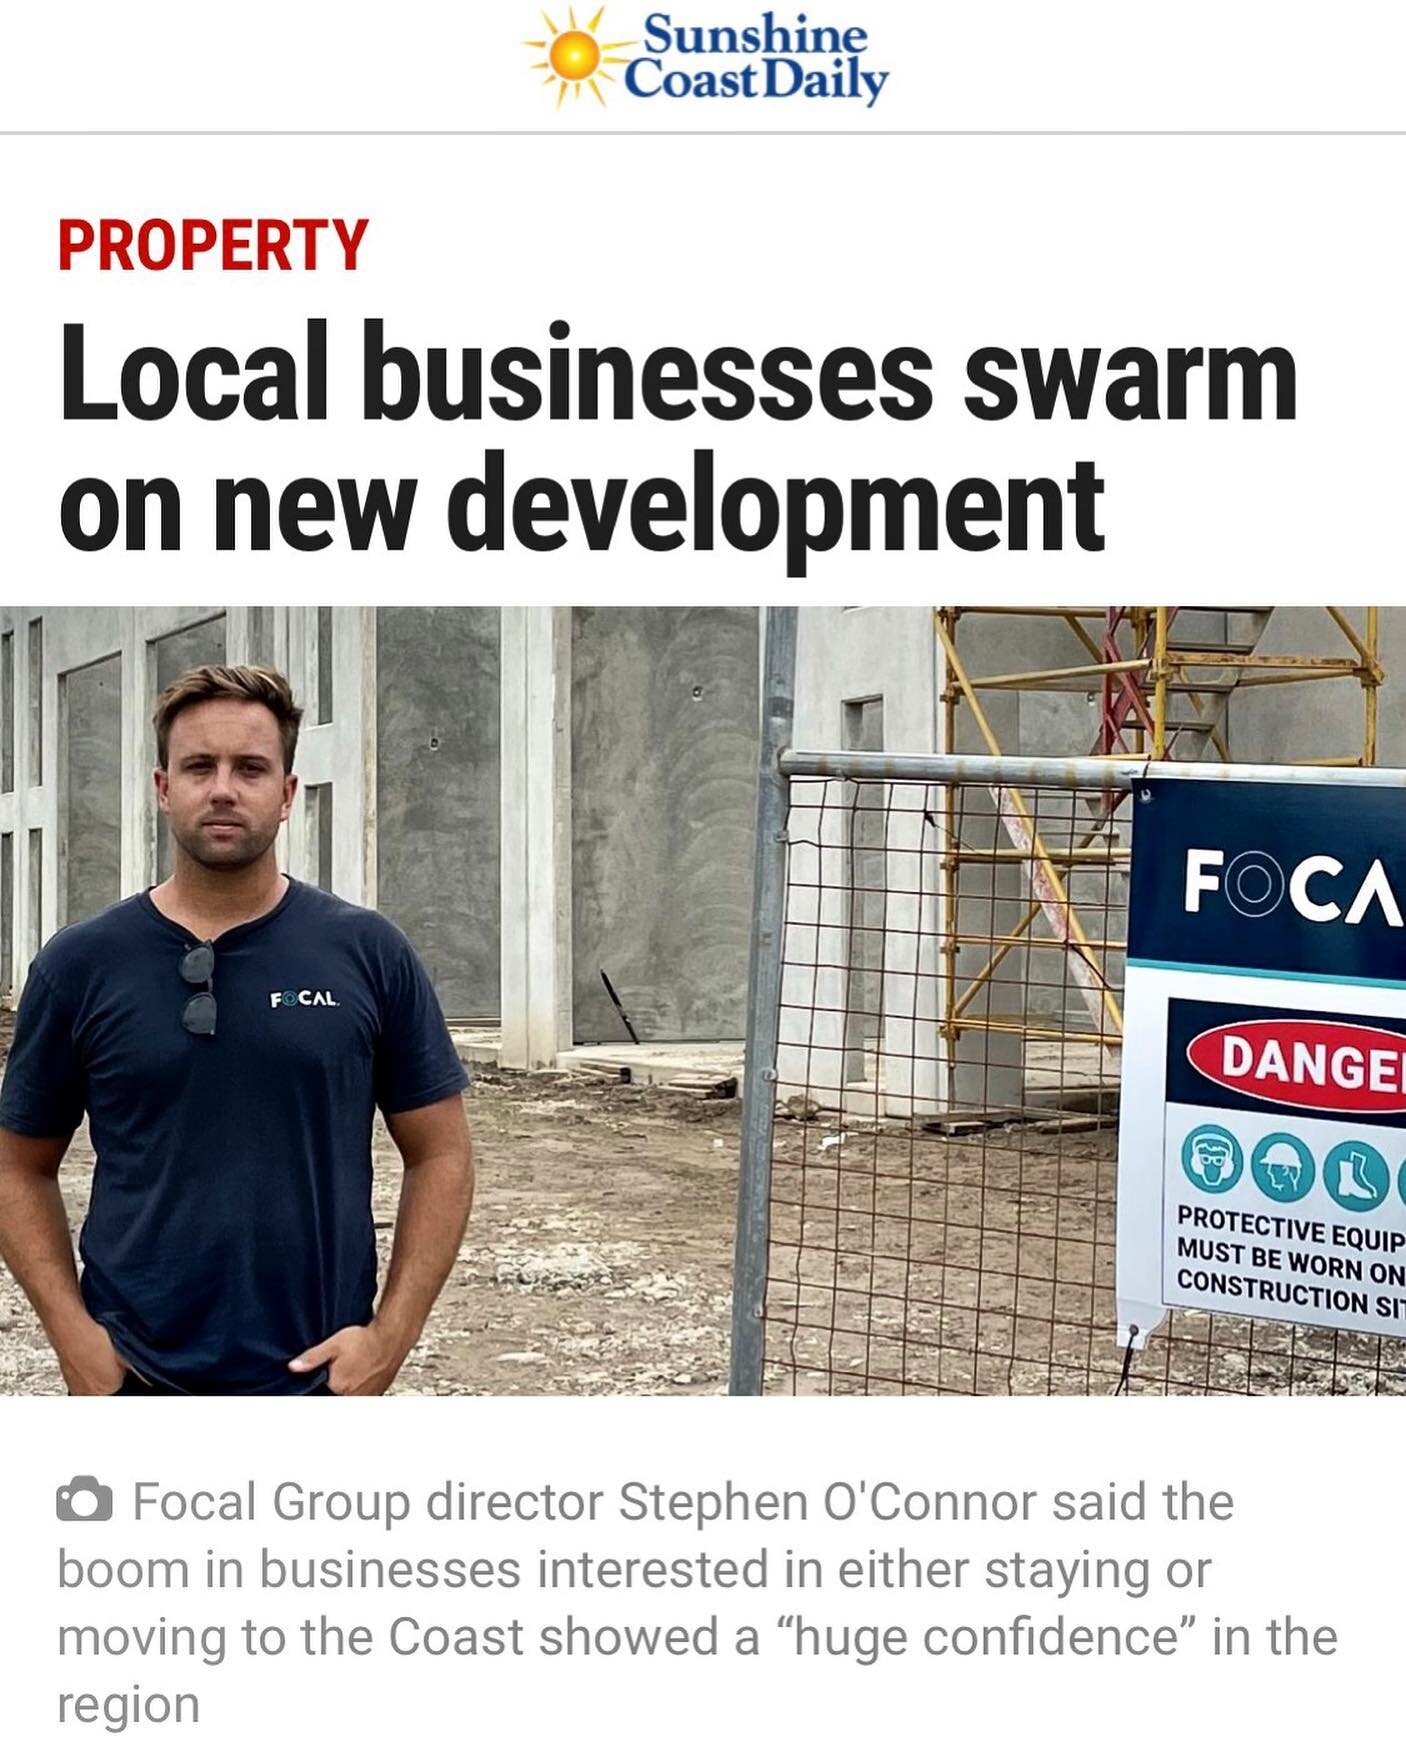 A good positive read in the @sunshinecoastdaily today, talking property and local business.

  https://m.sunshinecoastdaily.com.au/news/local-businesses-swarm-on-new-development/4205137/ 

#development #property #construction  #industrial #business #